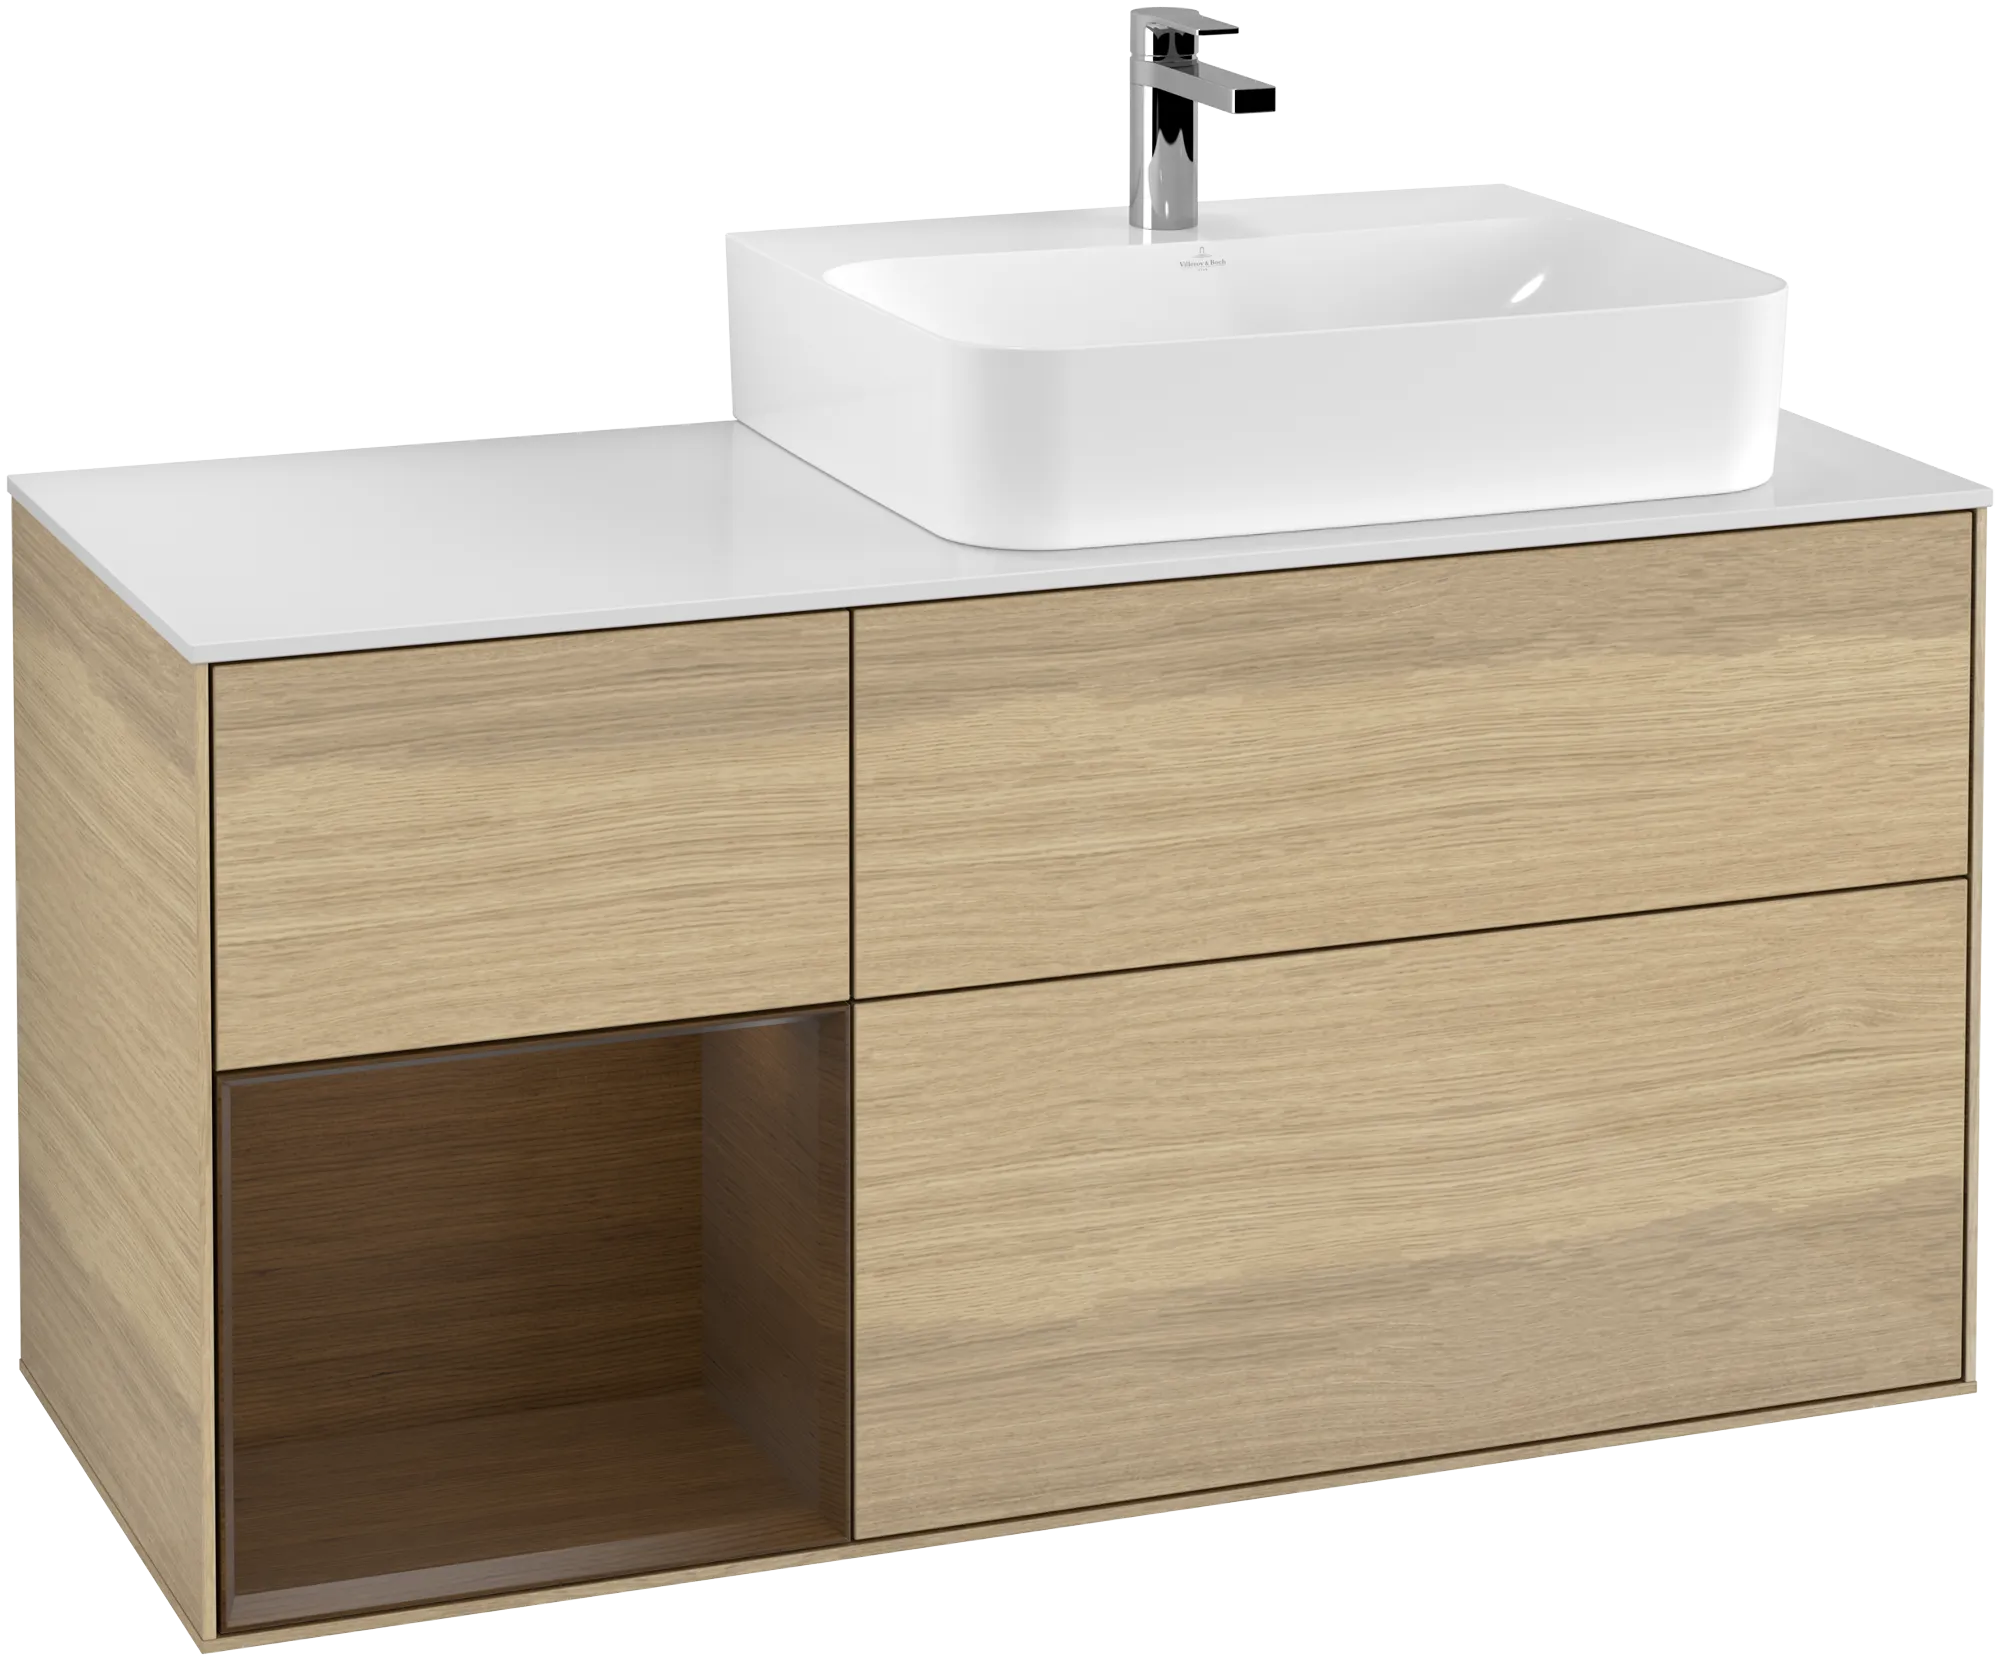 Picture of VILLEROY BOCH Finion Vanity unit, with lighting, 3 pull-out compartments, 1200 x 603 x 501 mm, Oak Veneer / Walnut Veneer / Glass White Matt #G141GNPC